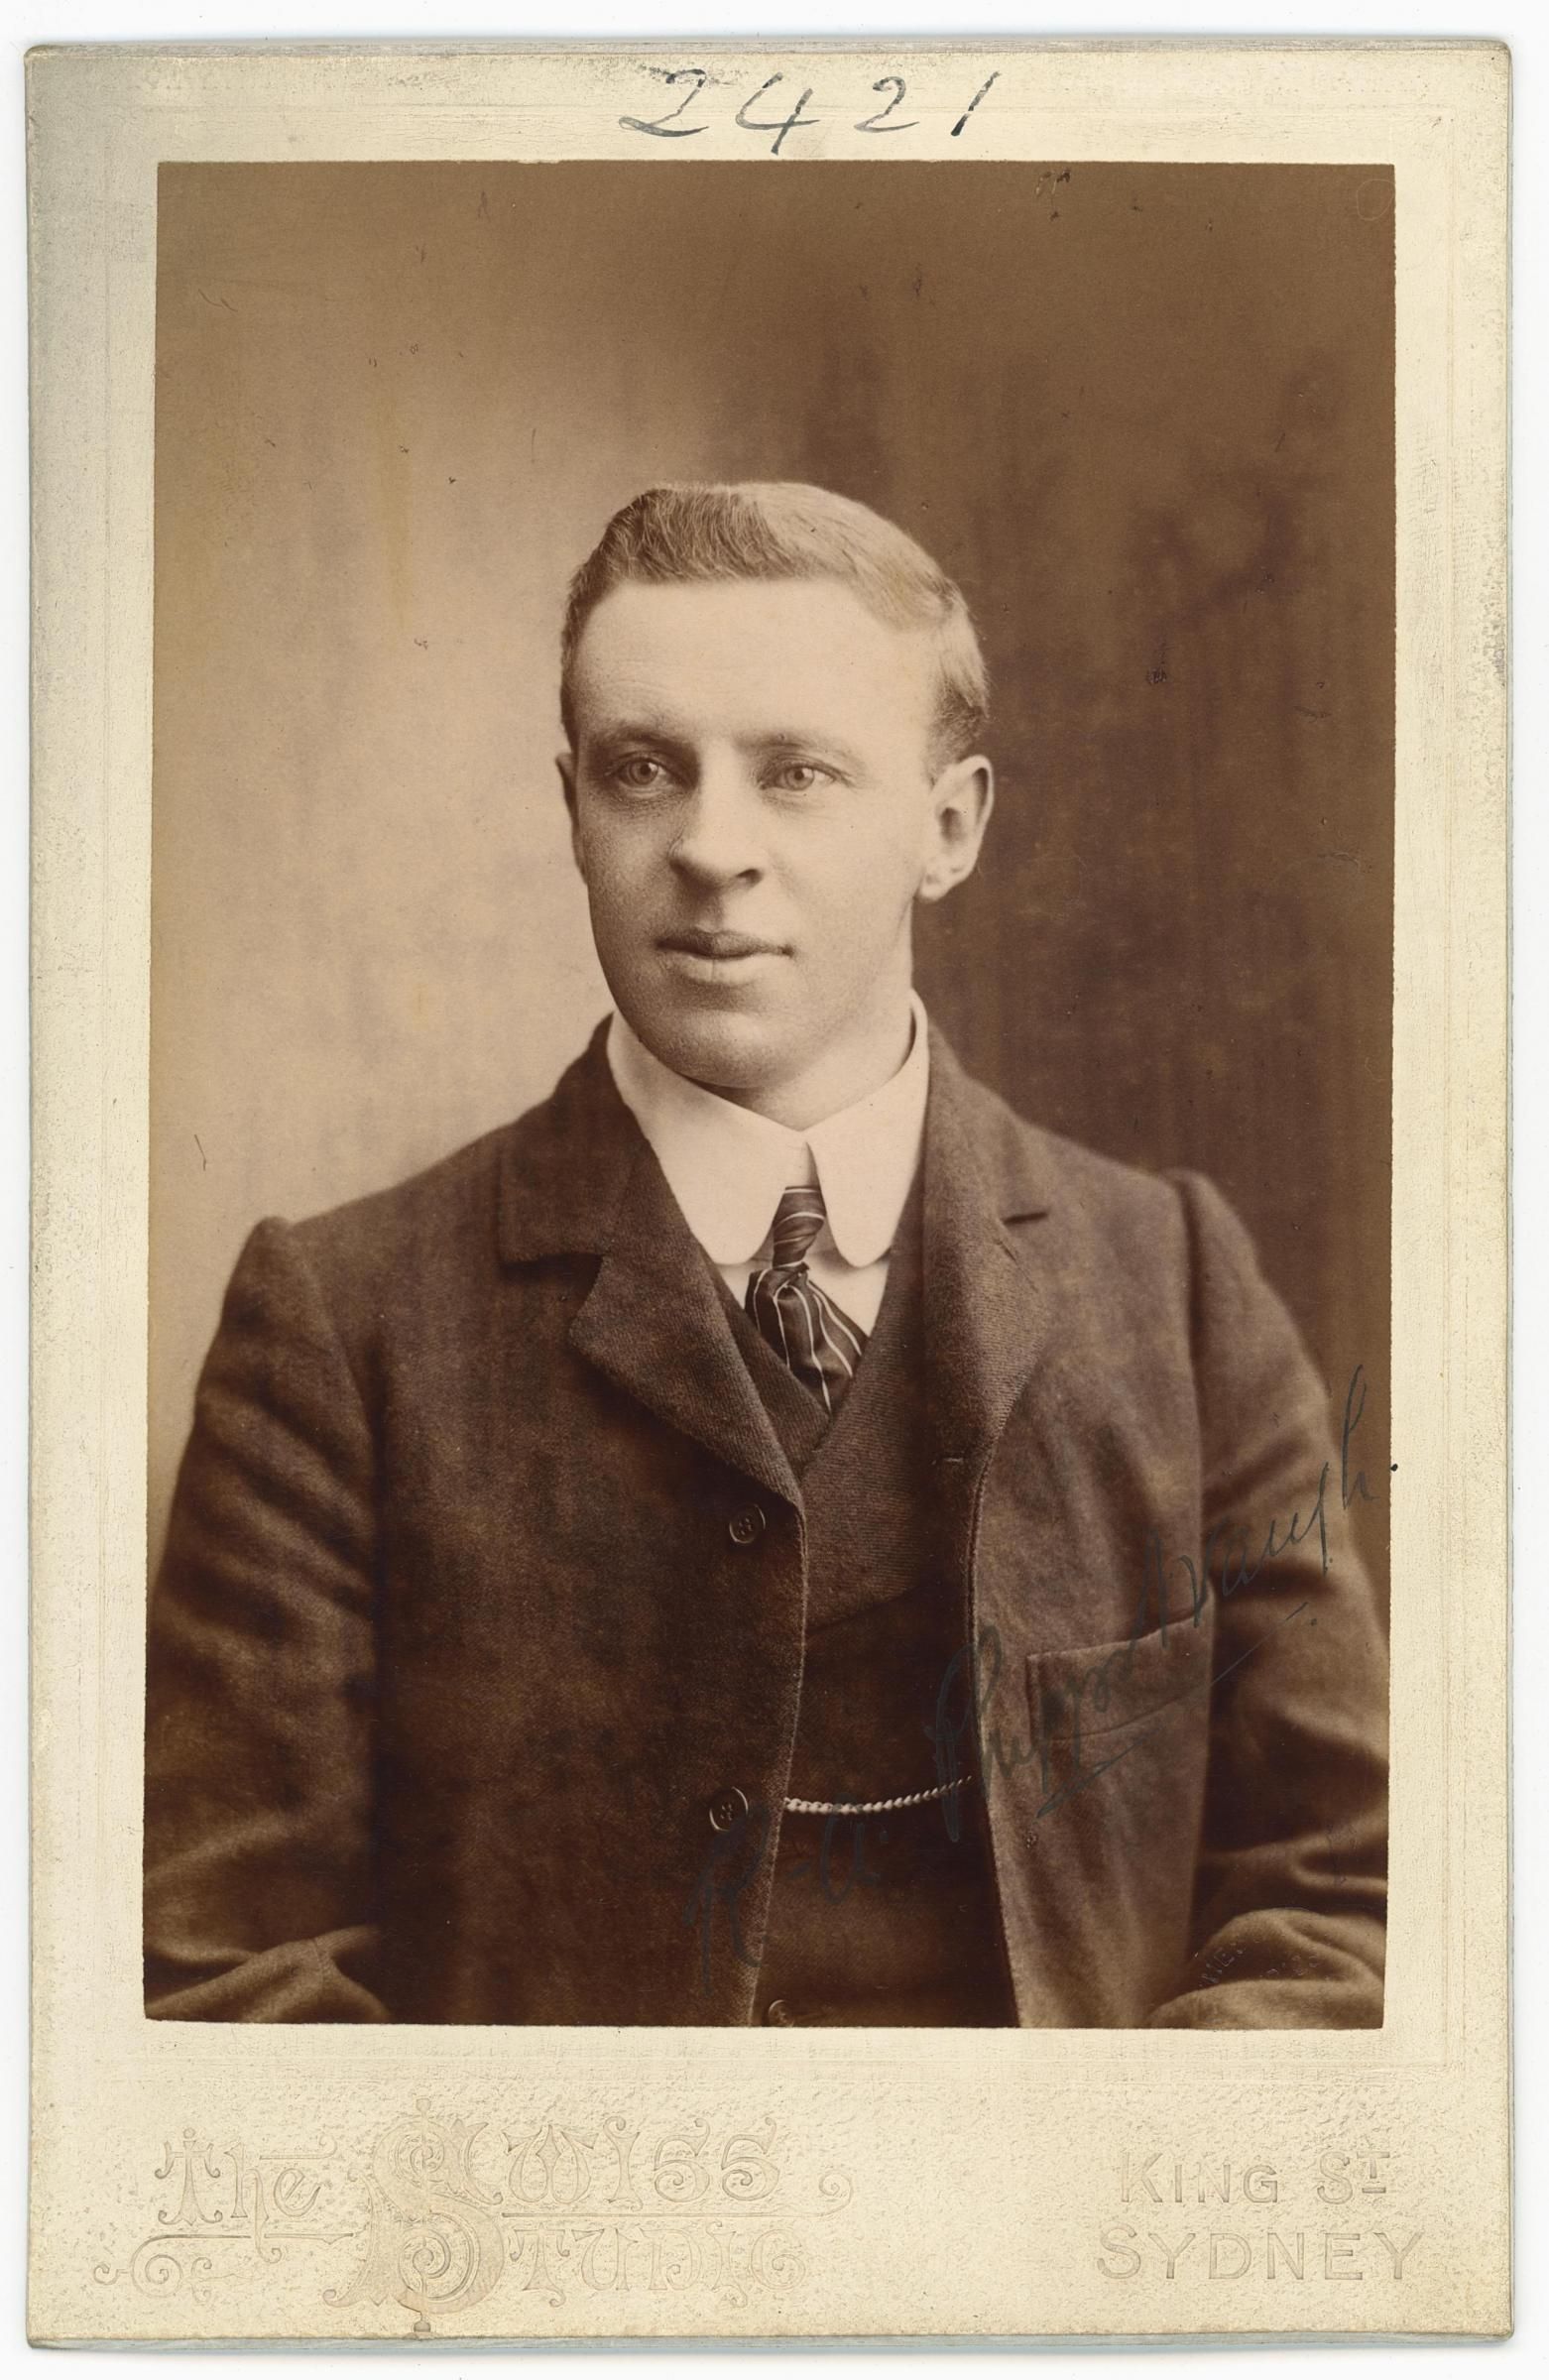 Richard Andrew Phipps Waugh. Source: The University of Sydney Book of Remembrance Entry